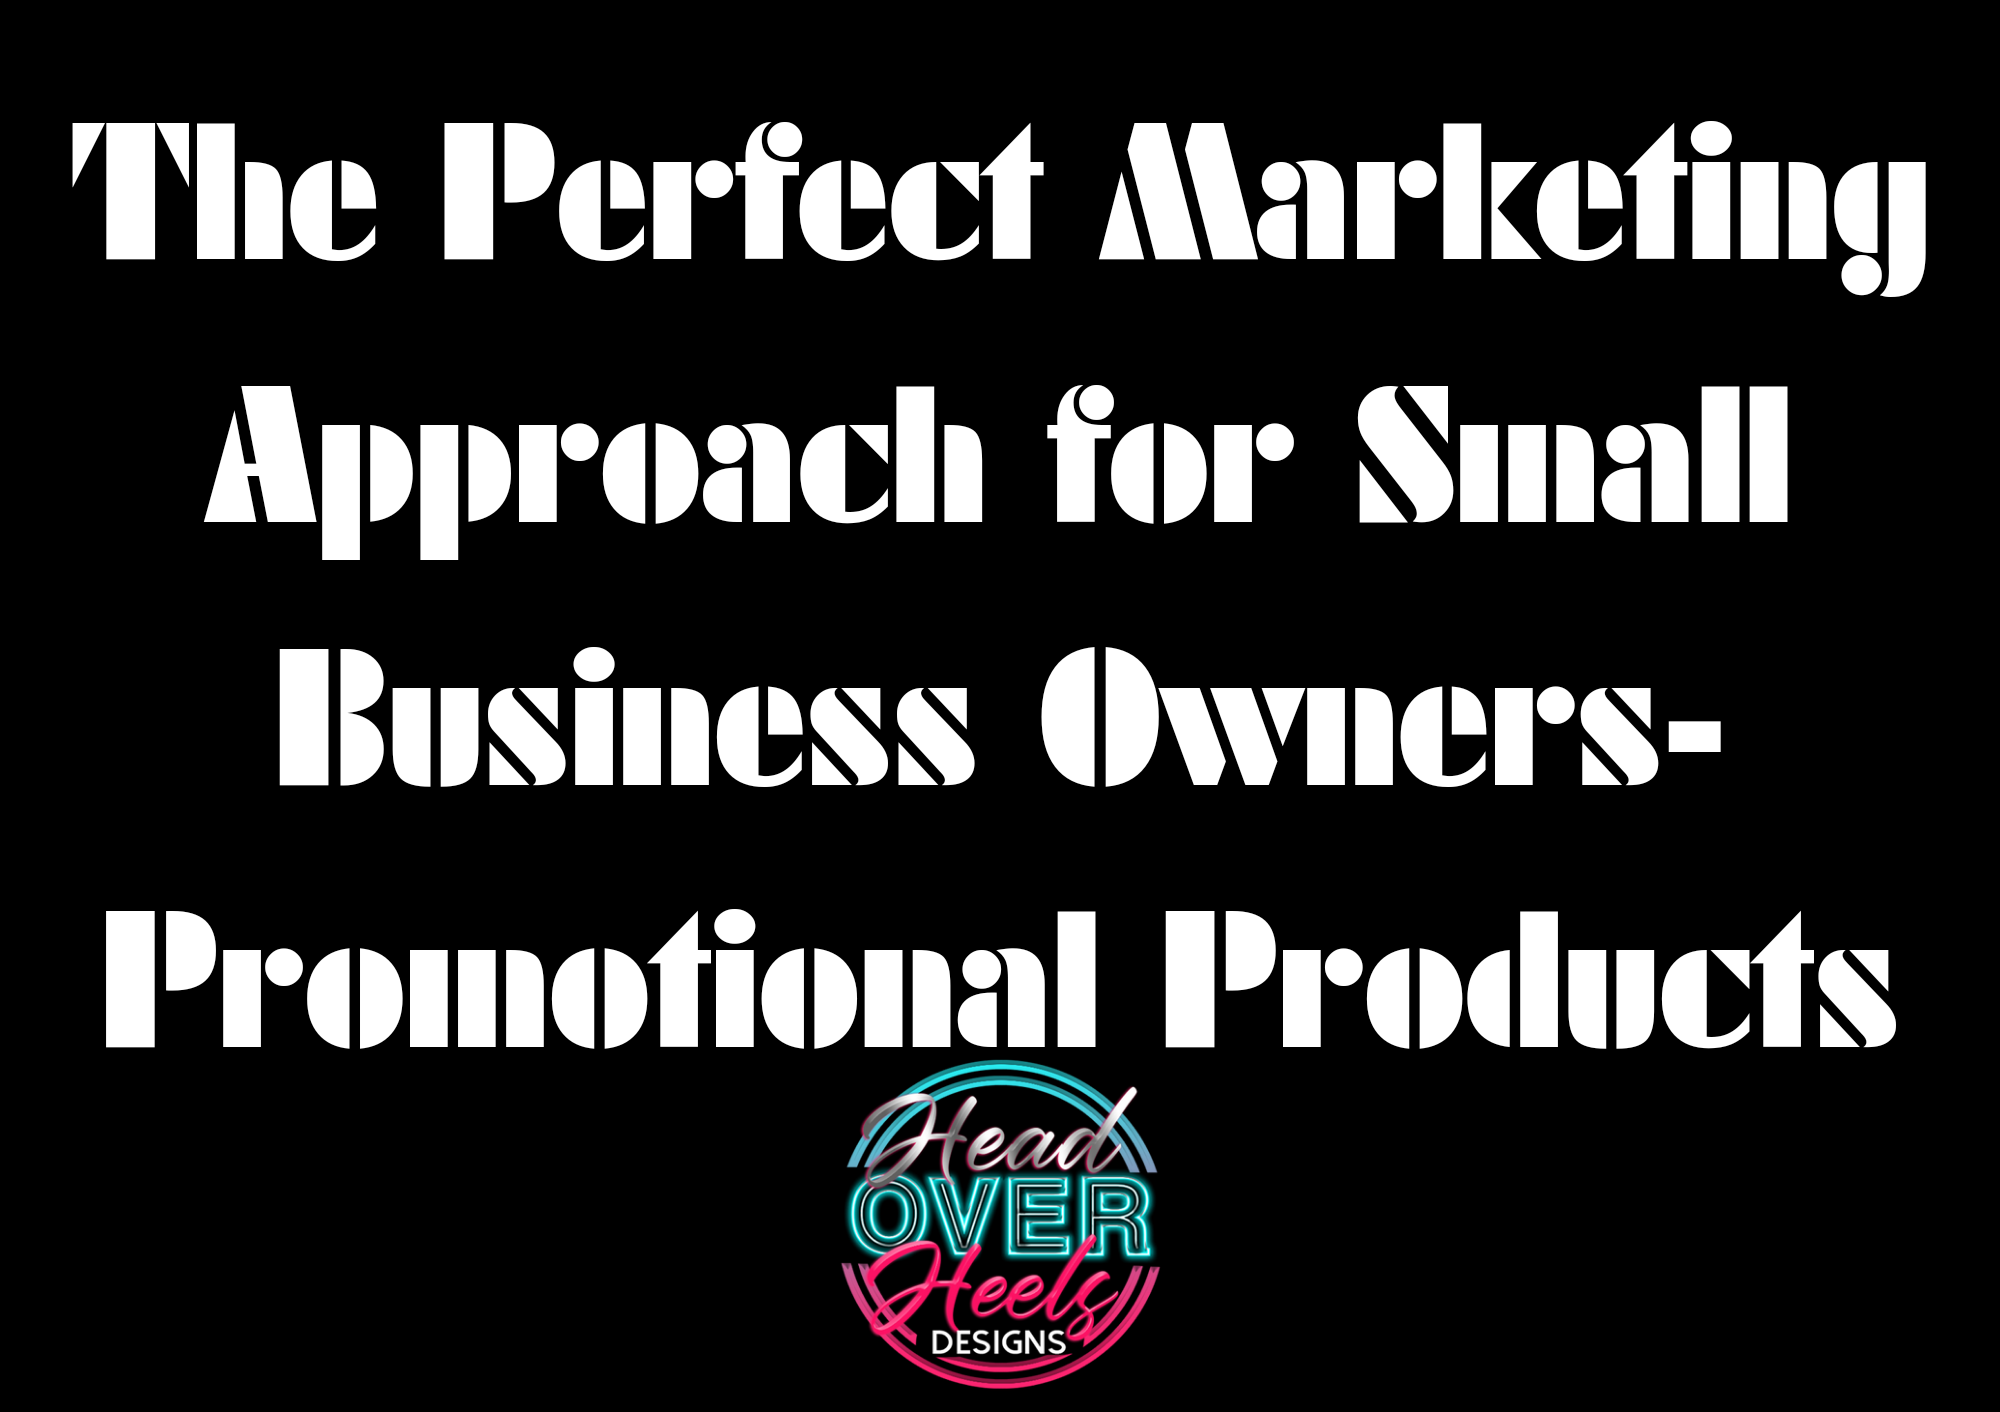 The Perfect Marketing Approach for Small Business Owners-Promotional Products